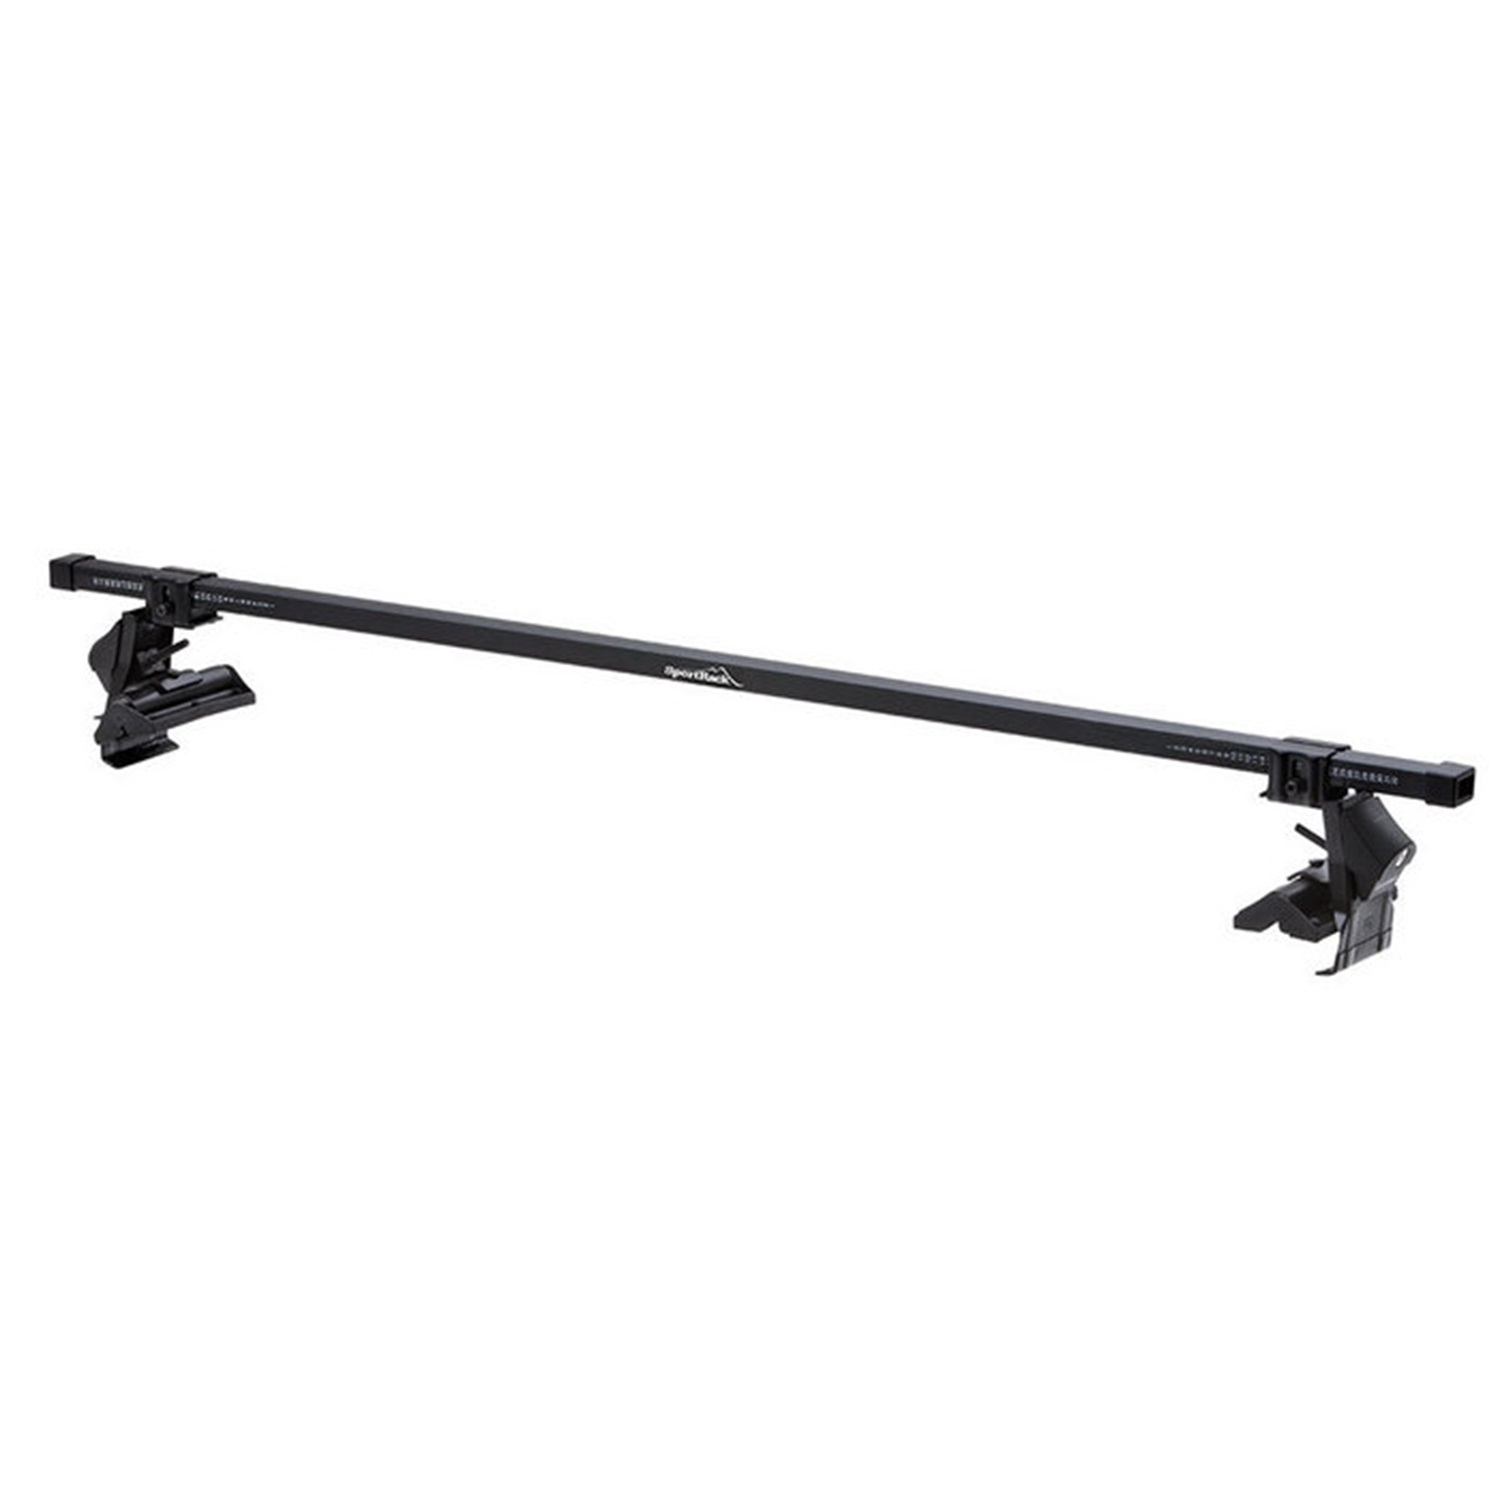 Thule Thule SR1009 SportRack Complete Roof Rack System Fits 03-14 XC90 XC90 (SUV)